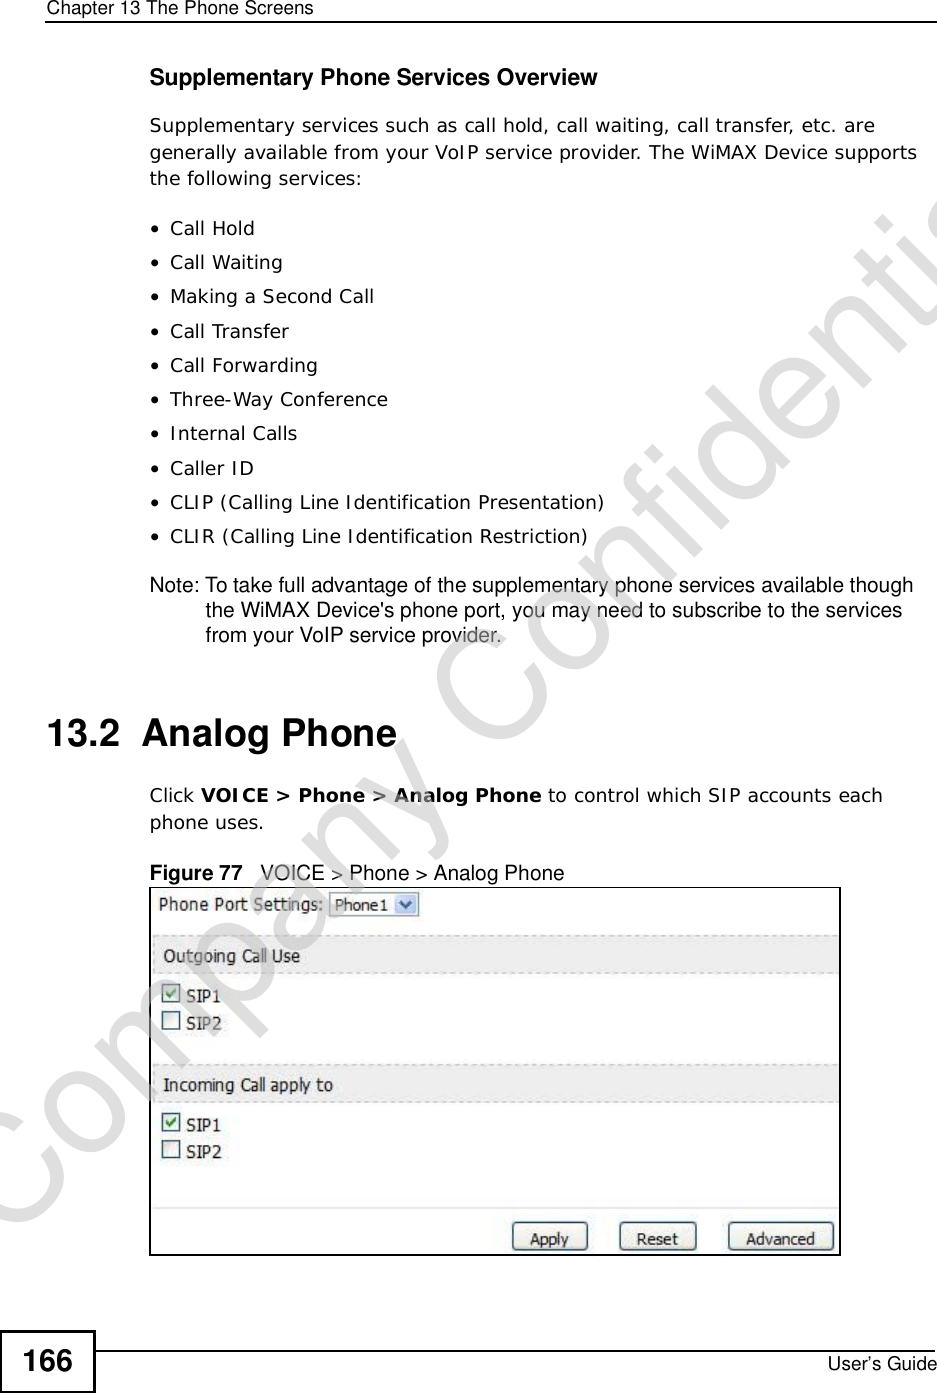 Chapter 13The Phone ScreensUser’s Guide166Supplementary Phone Services OverviewSupplementary services such as call hold, call waiting, call transfer, etc. are generally available from your VoIP service provider. The WiMAX Device supports the following services:•Call Hold•Call Waiting•Making a Second Call•Call Transfer•Call Forwarding•Three-Way Conference•Internal Calls•Caller ID•CLIP (Calling Line Identification Presentation)•CLIR (Calling Line Identification Restriction)Note: To take full advantage of the supplementary phone services available though the WiMAX Device&apos;s phone port, you may need to subscribe to the services from your VoIP service provider.13.2  Analog PhoneClick VOICE &gt; Phone &gt; Analog Phone to control which SIP accounts each phone uses.Figure 77   VOICE &gt; Phone &gt; Analog PhoneCompany Confidential